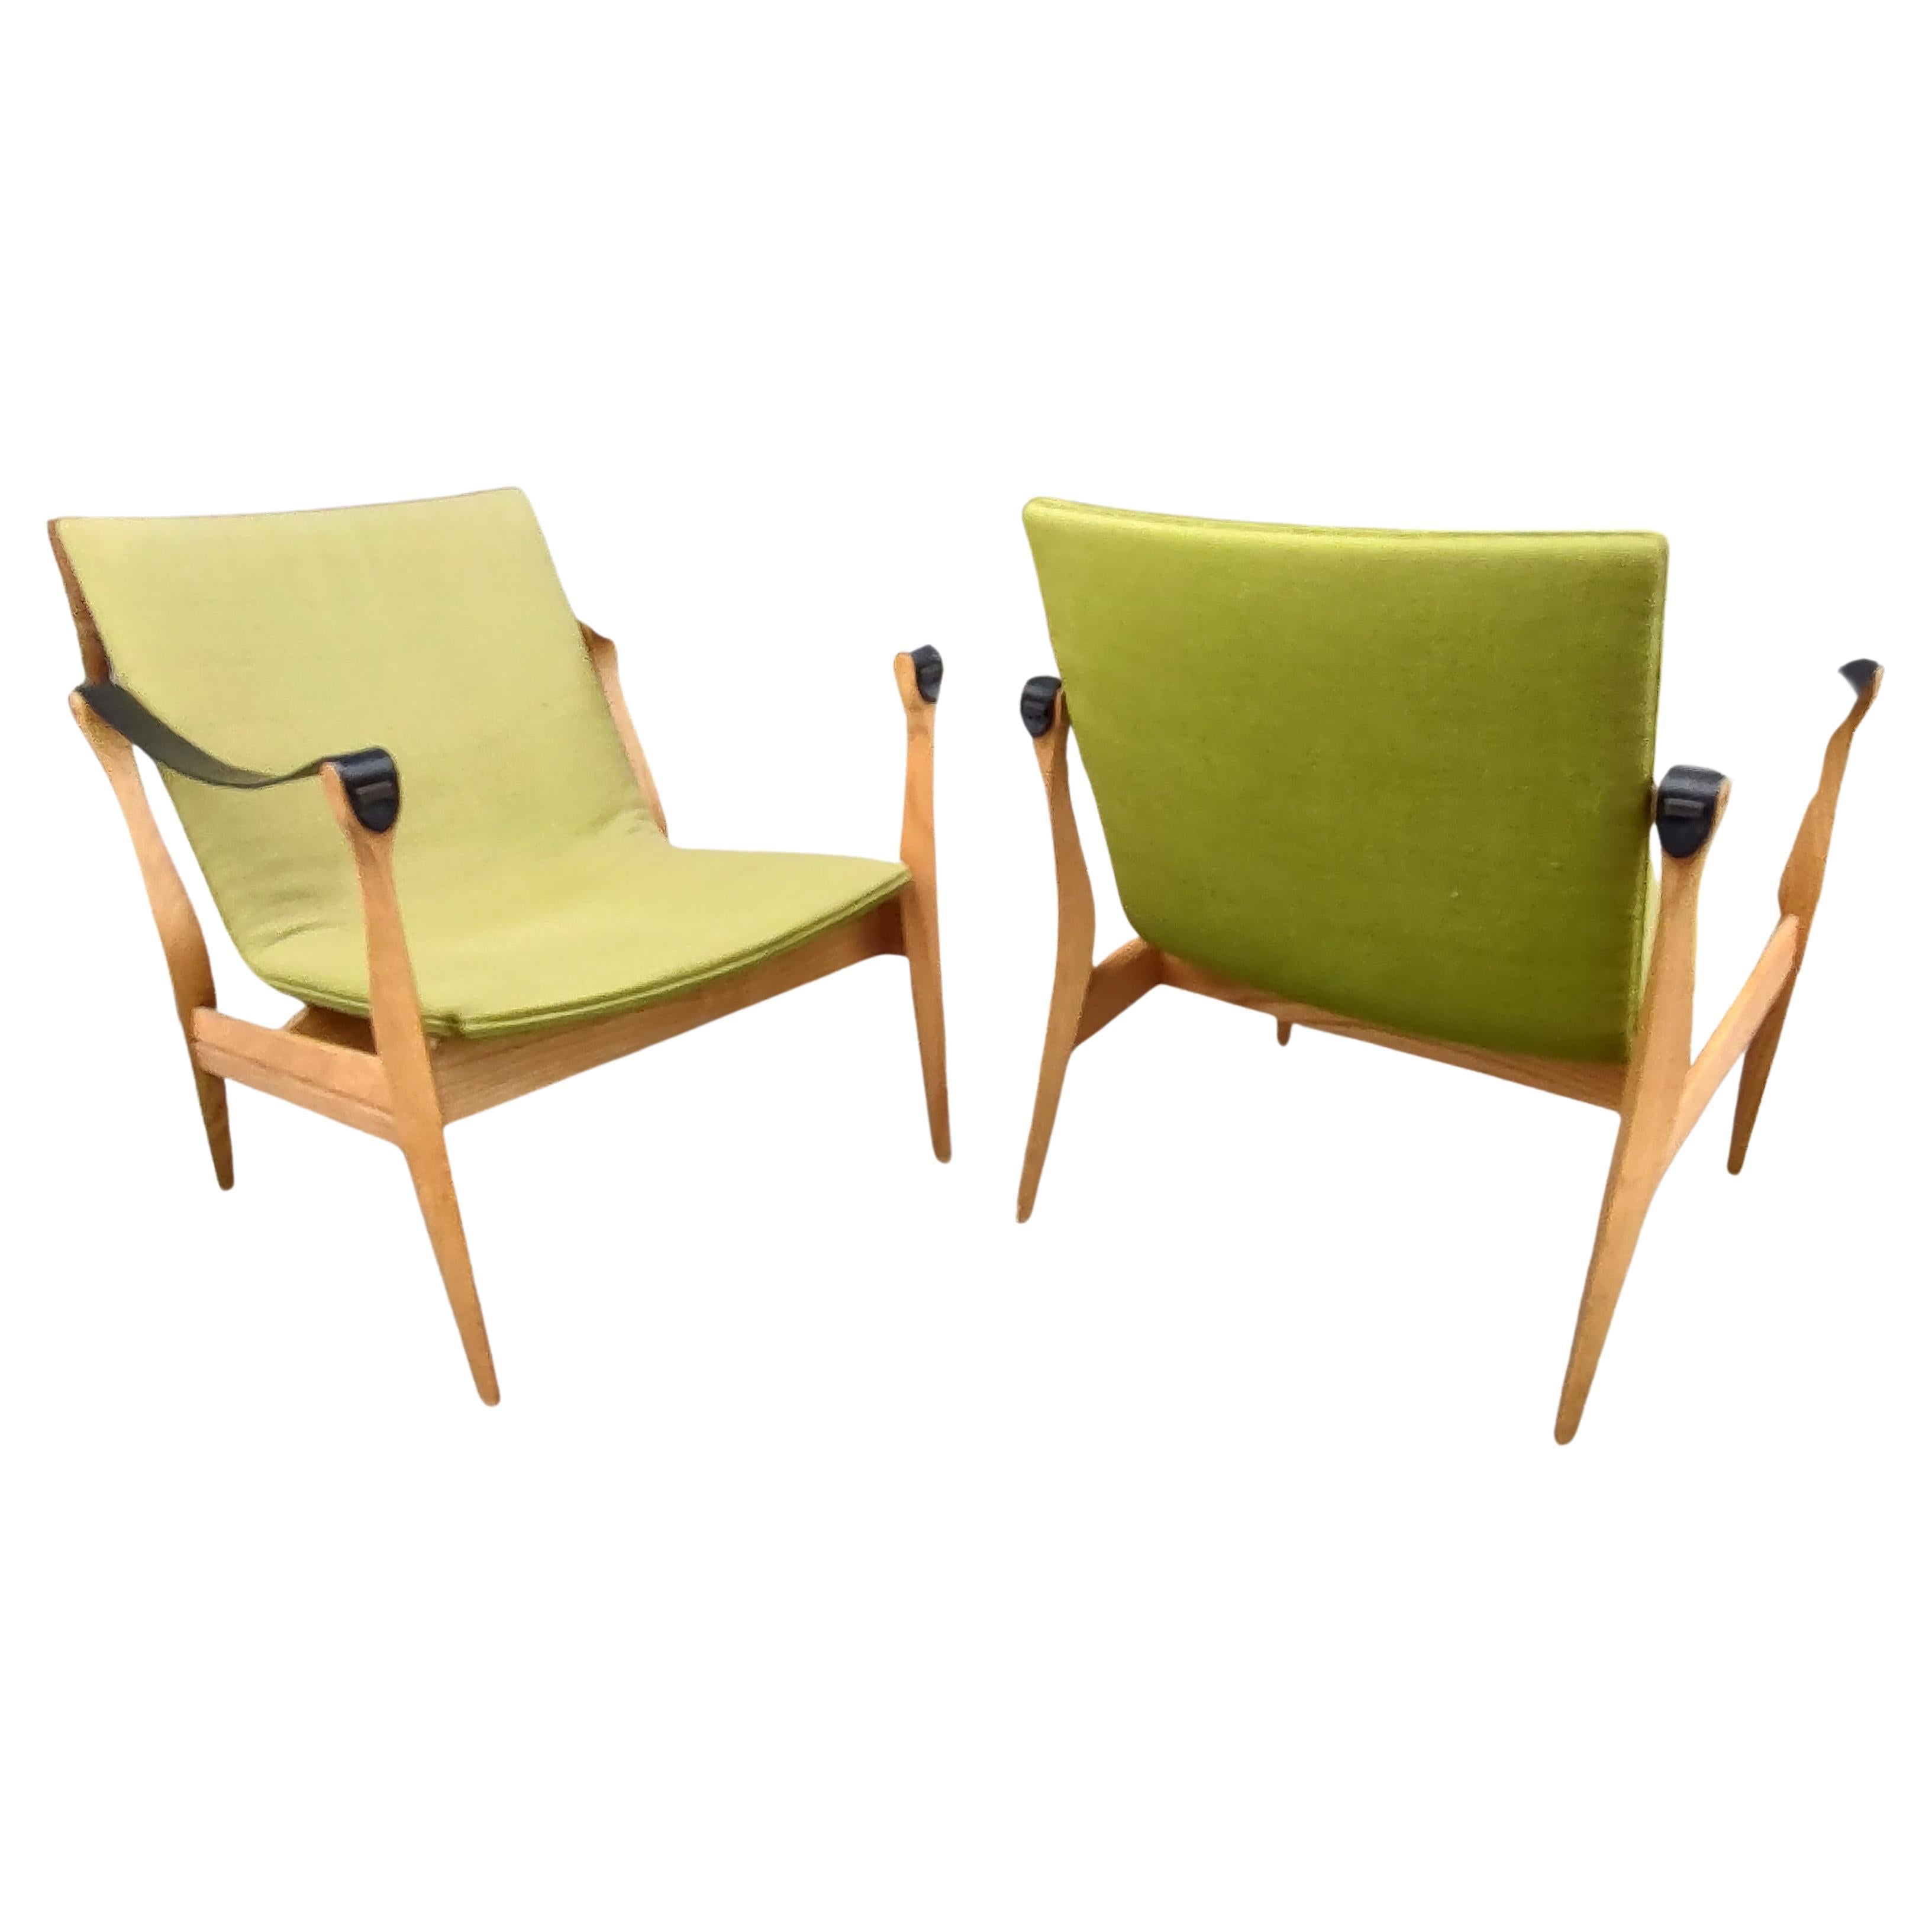 Pair of Mid-Century Modern Safari Chairs by Karen & Ebbe Clemmensen 4 Hansen In Good Condition For Sale In Port Jervis, NY